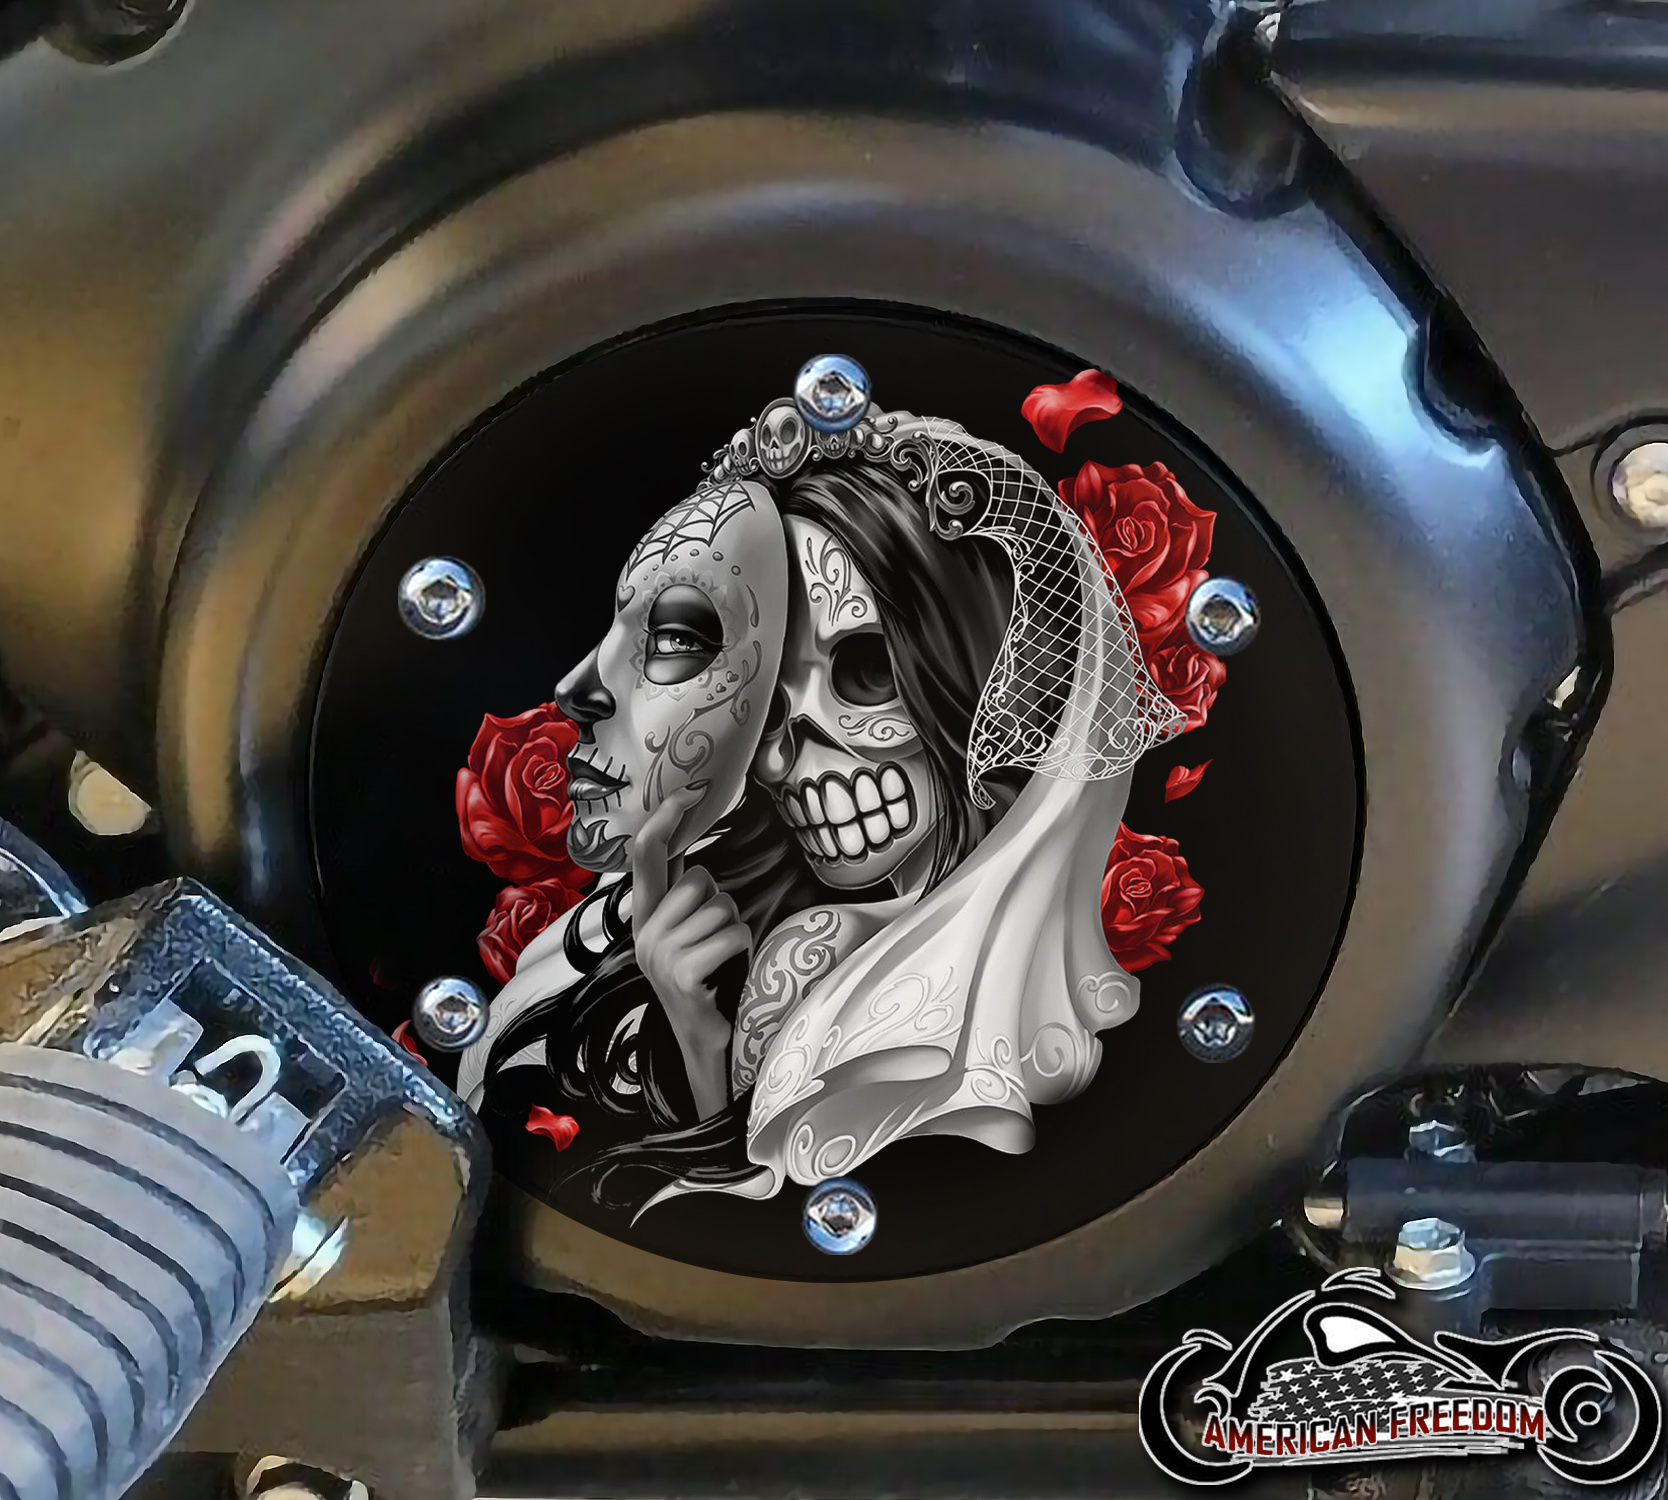 SUZUKI M109R Derby/Engine Cover - DOTD Mask With Roses